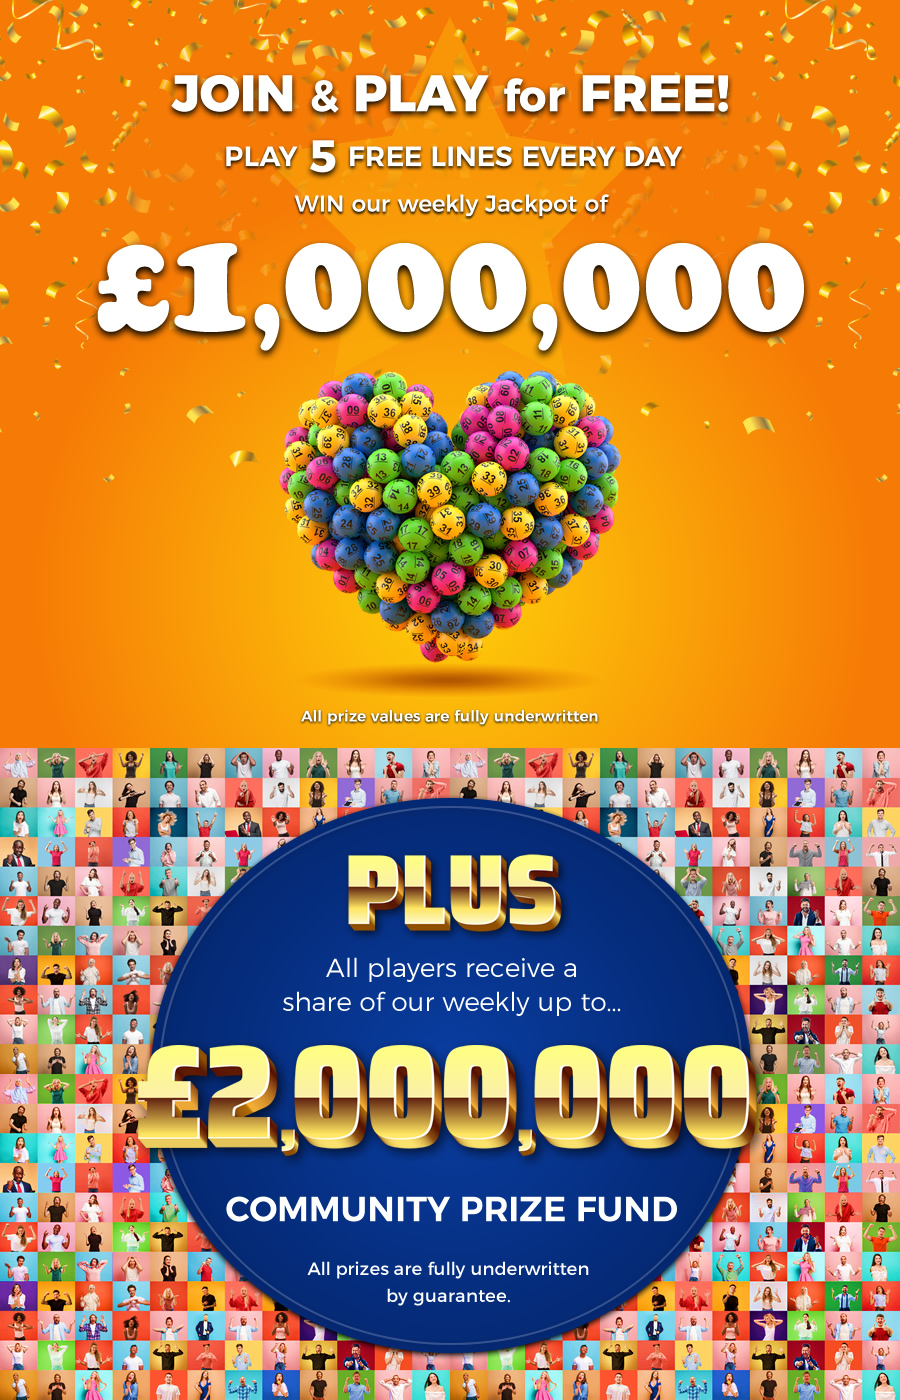 Play 5 FREE Lotto Lines every DAY! - WIN Our £250,000 Jackpot, plus all players receive a share of our up to one million pound community prize fund